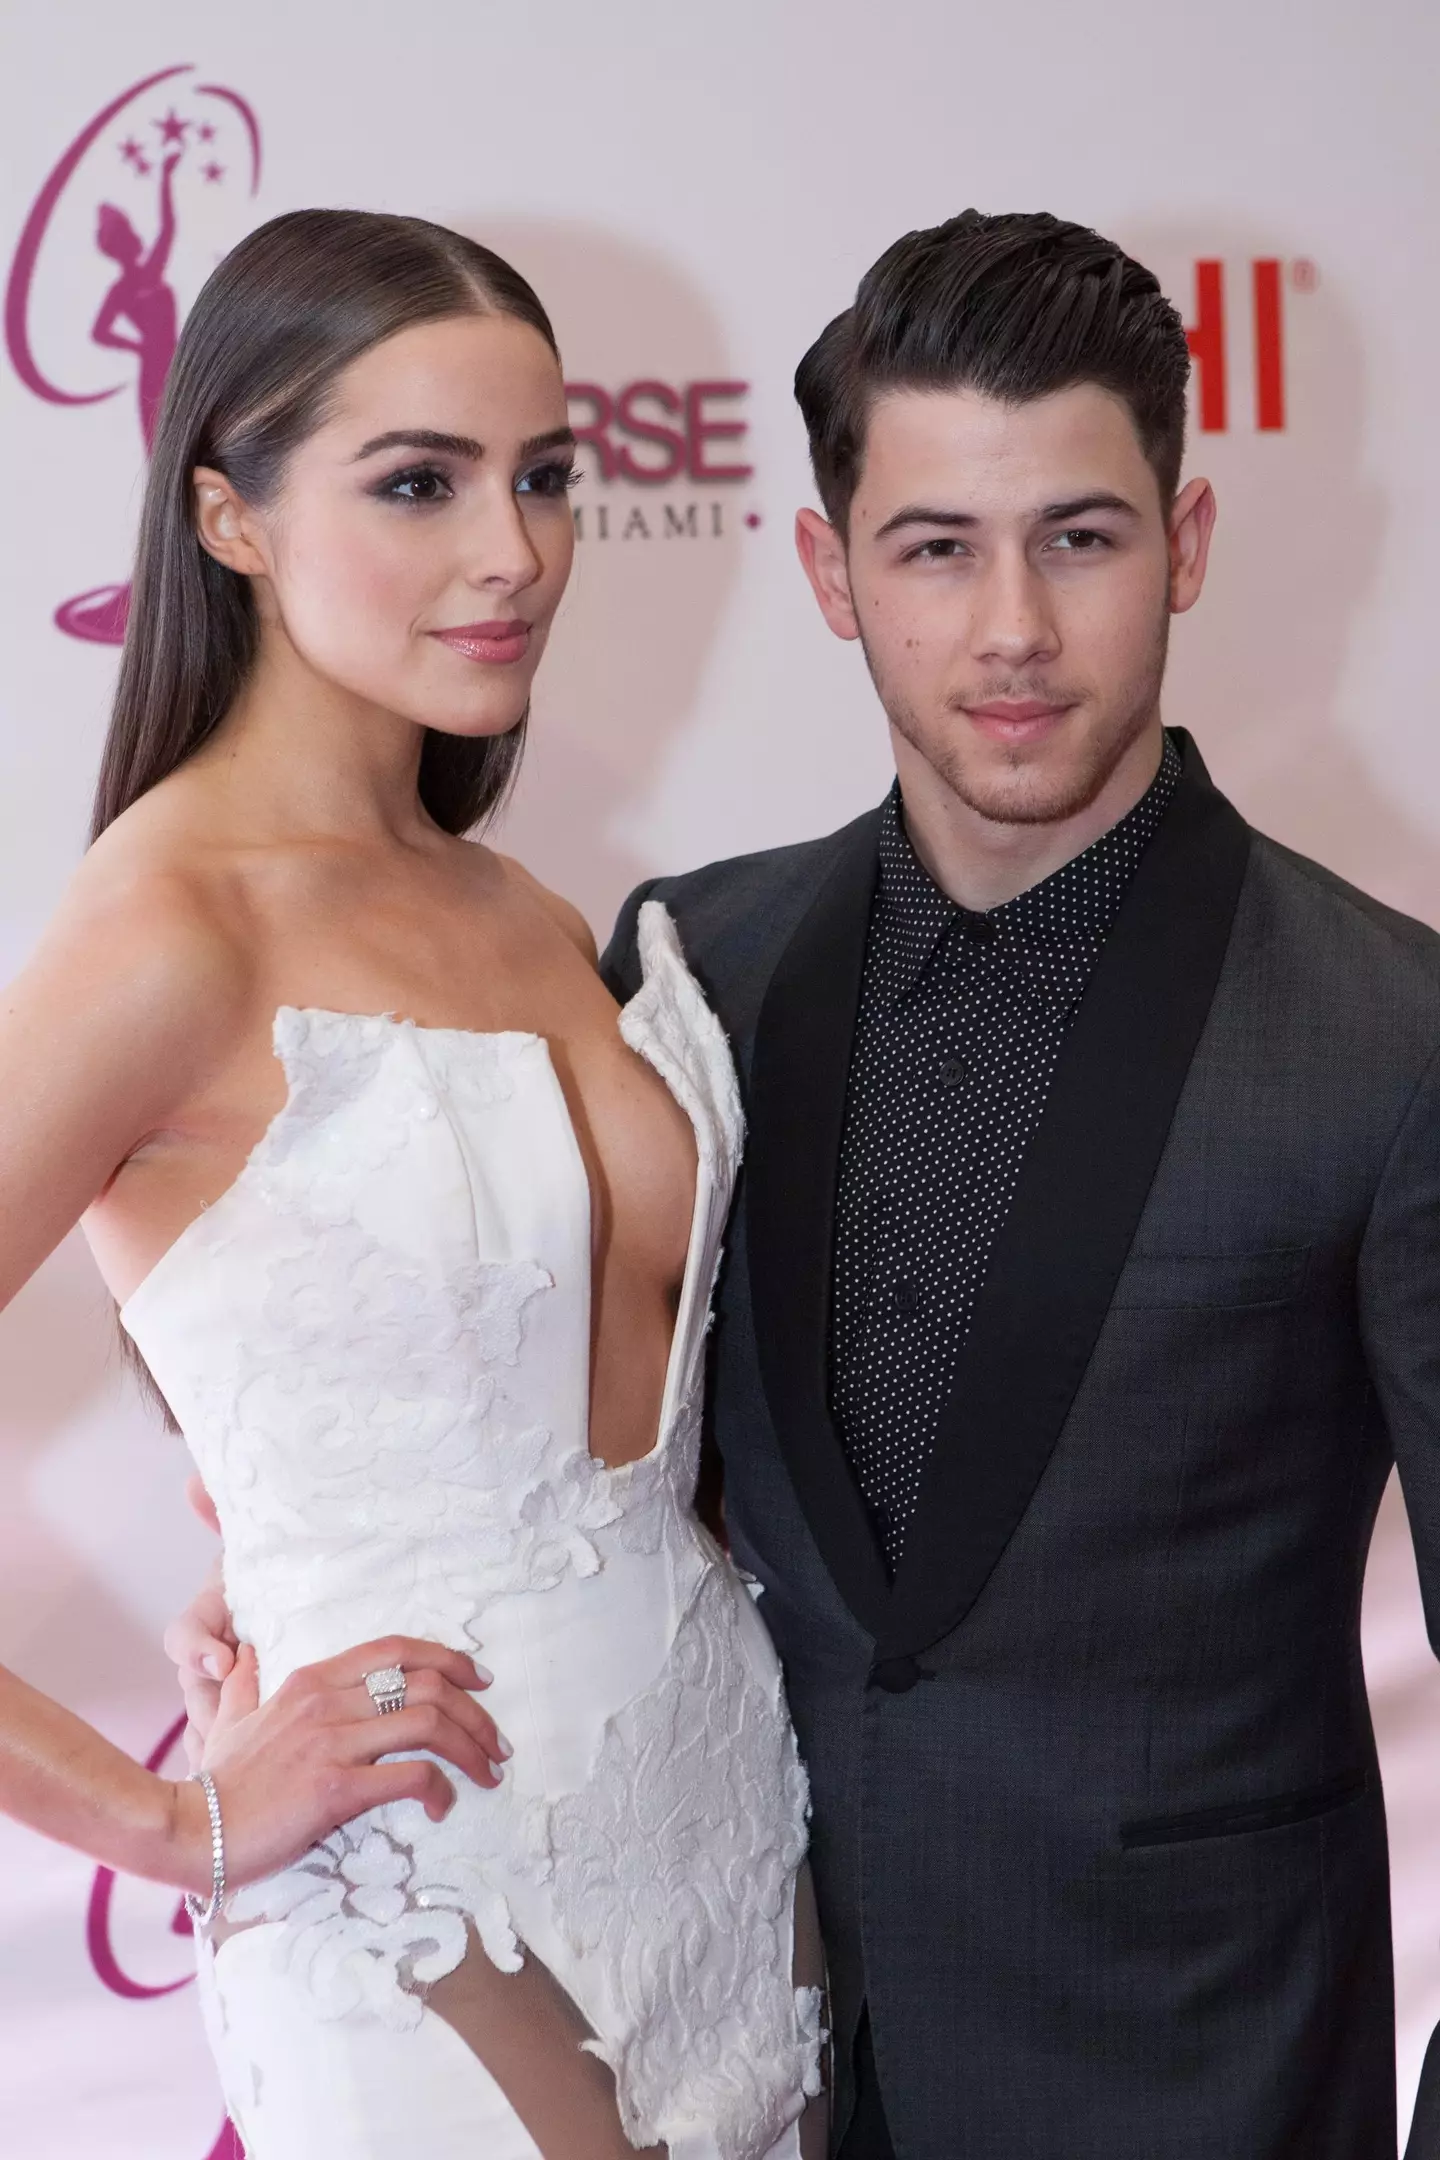 Olivia Culpo and Nick Jonas dated for around two years.